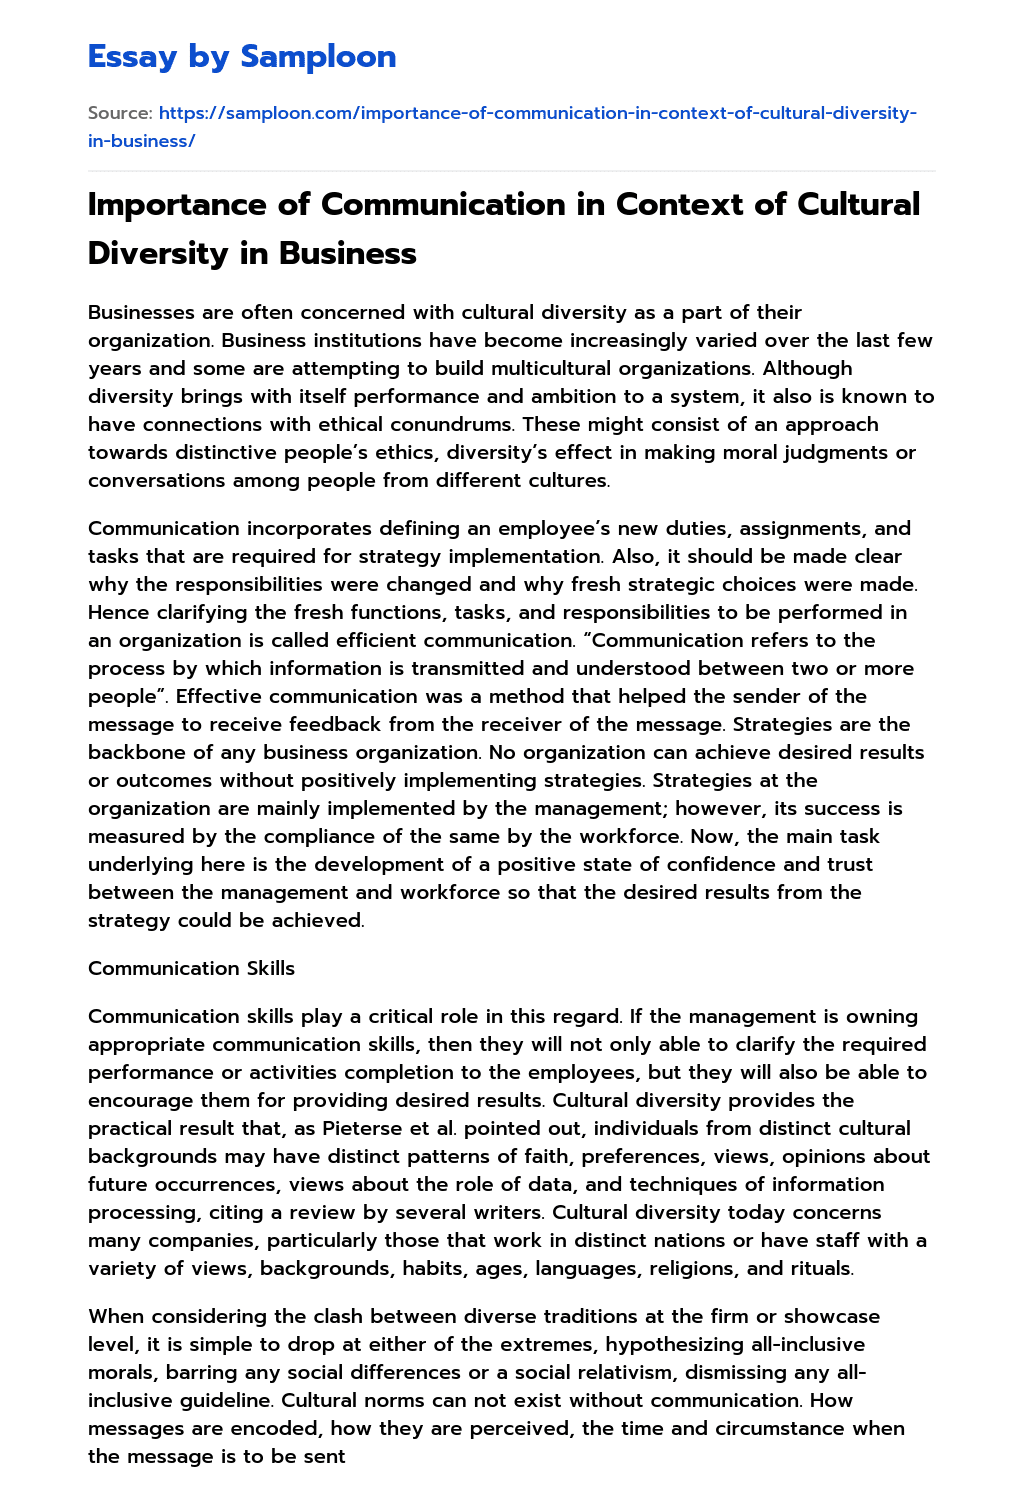 Importance of Communication in Context of Cultural Diversity in Business essay